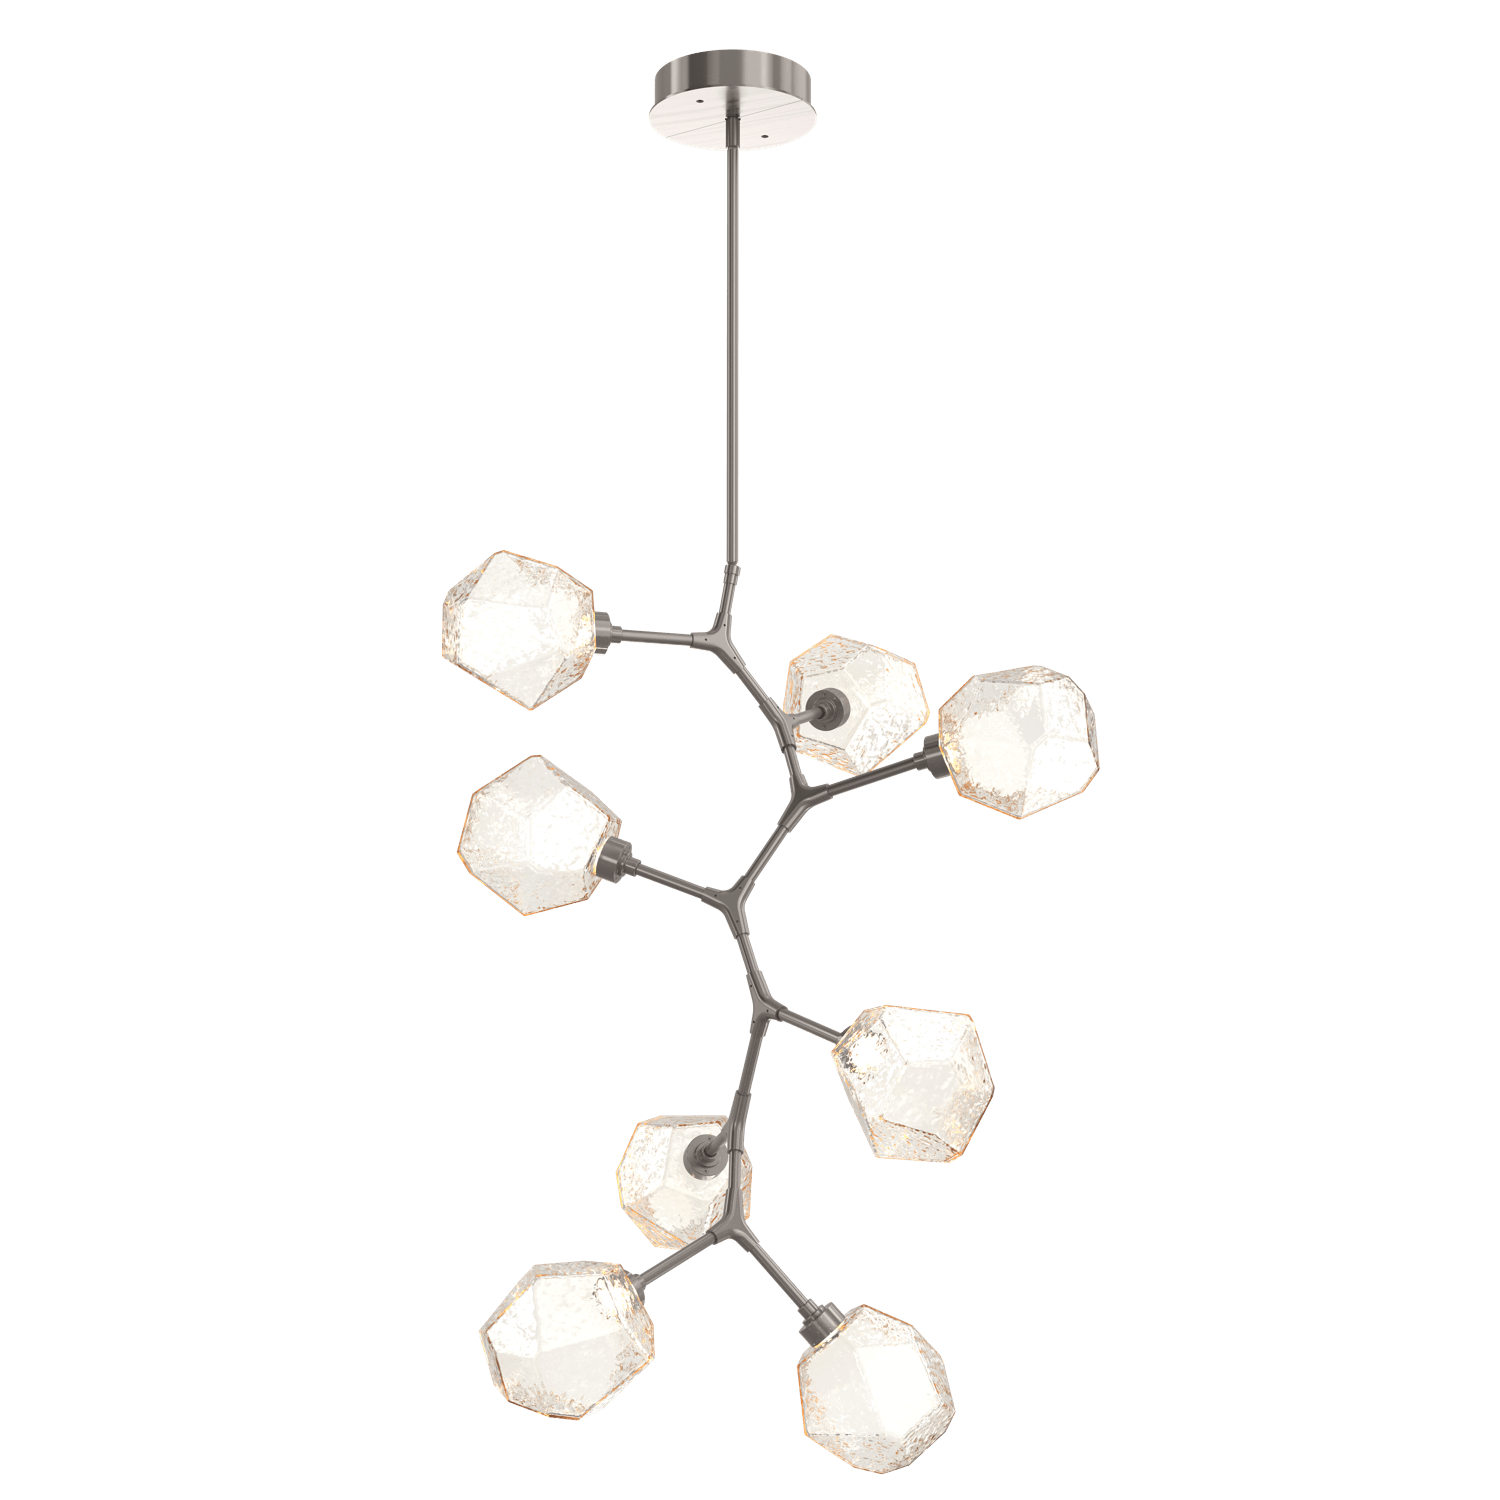 CHB0039-VB-GM-A-Hammerton-Studio-Gem-8-light-modern-vine-chandelier-with-gunmetal-finish-and-amber-blown-glass-shades-and-LED-lamping